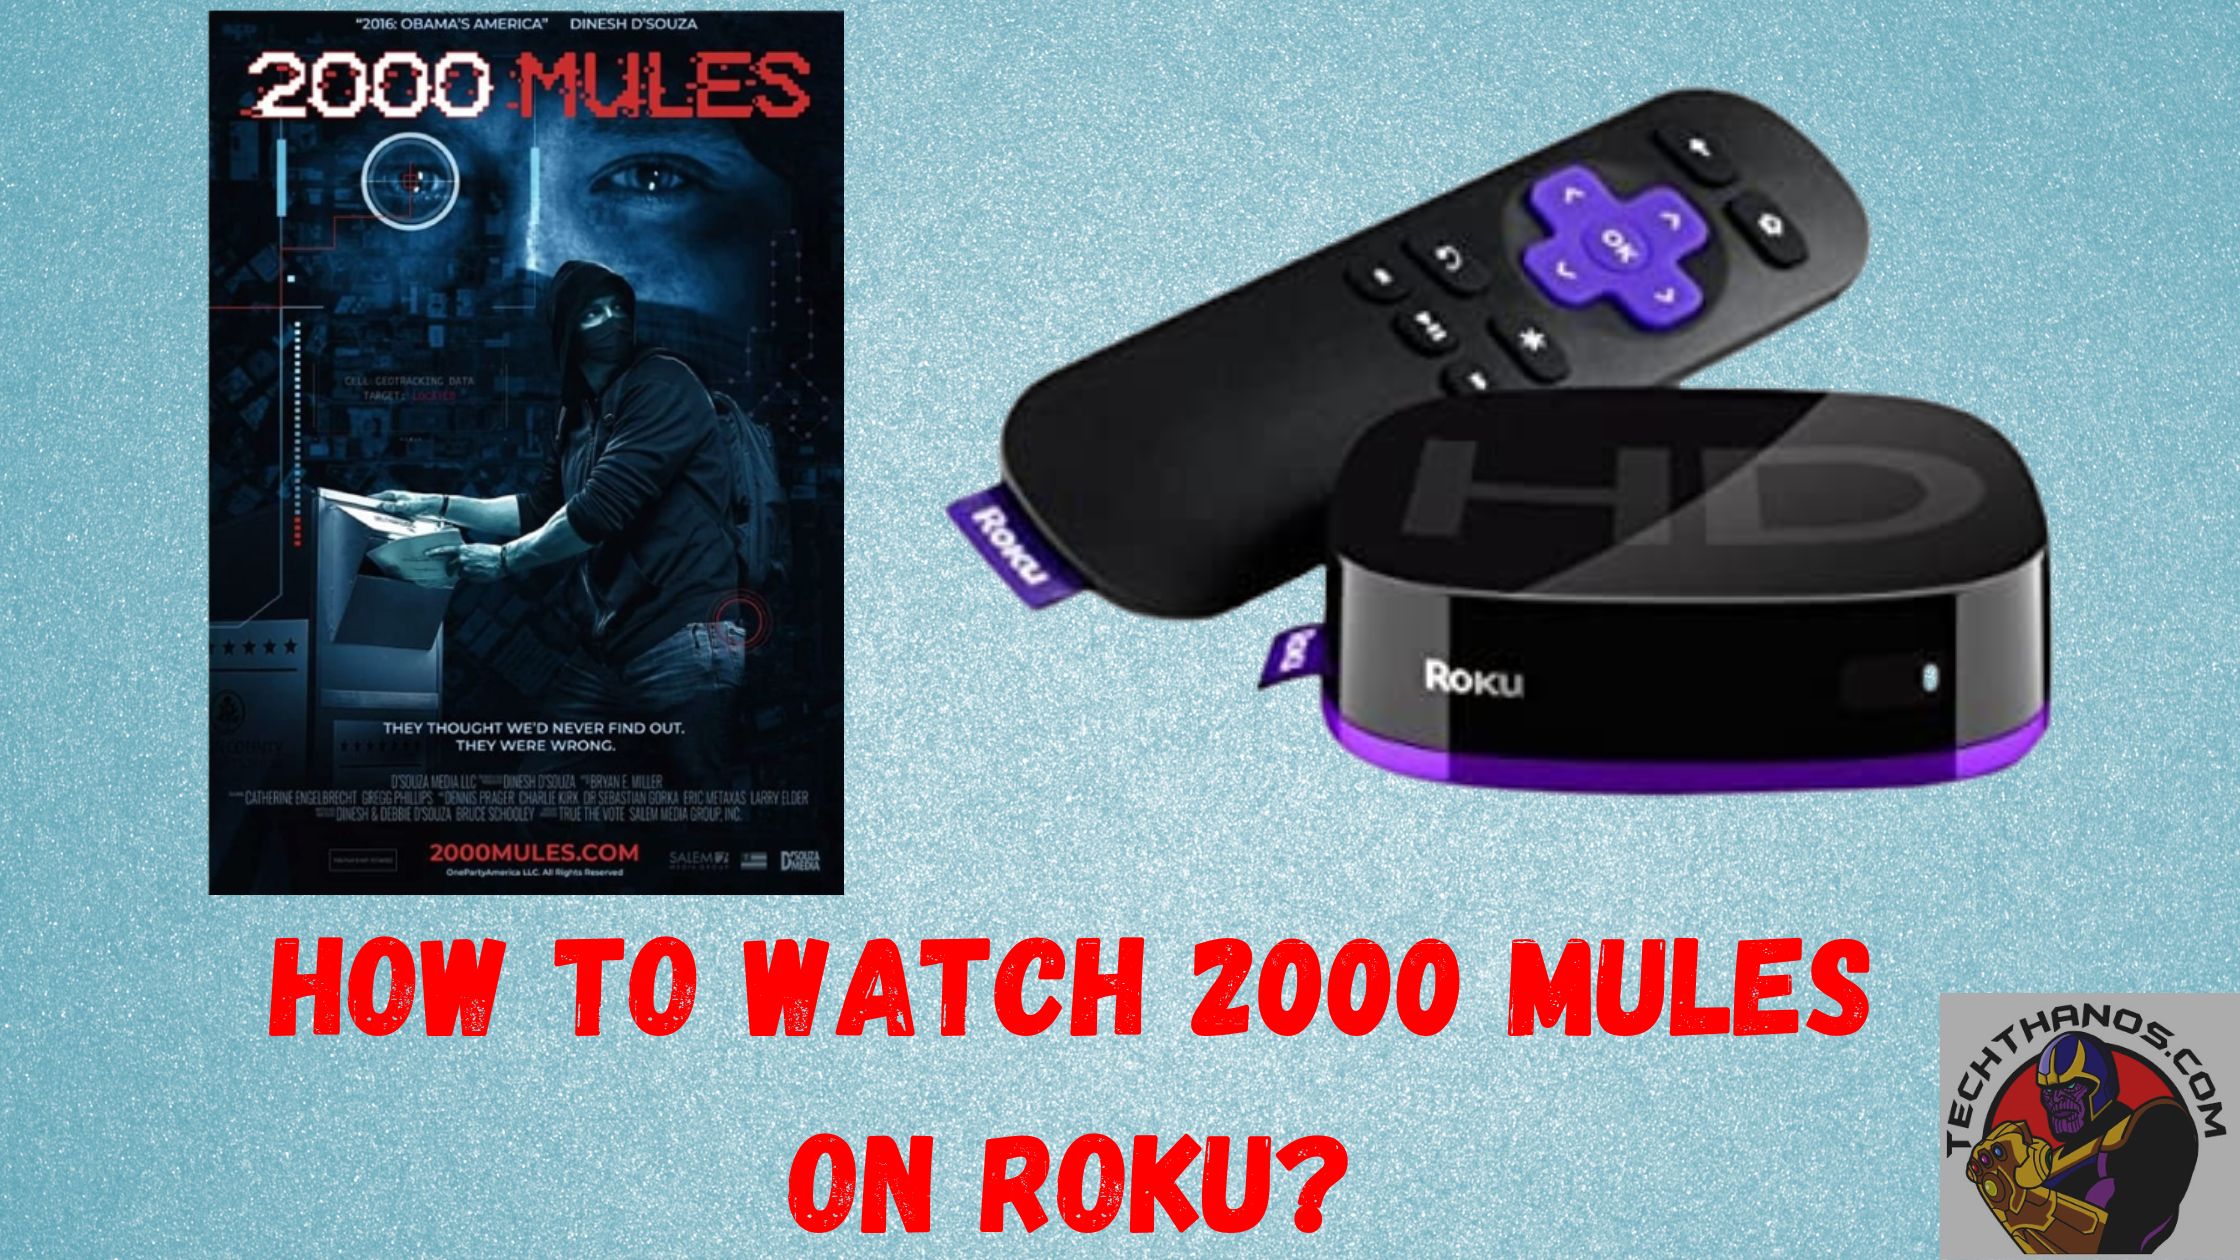 How to Watch 2000 Mules on Apple TV